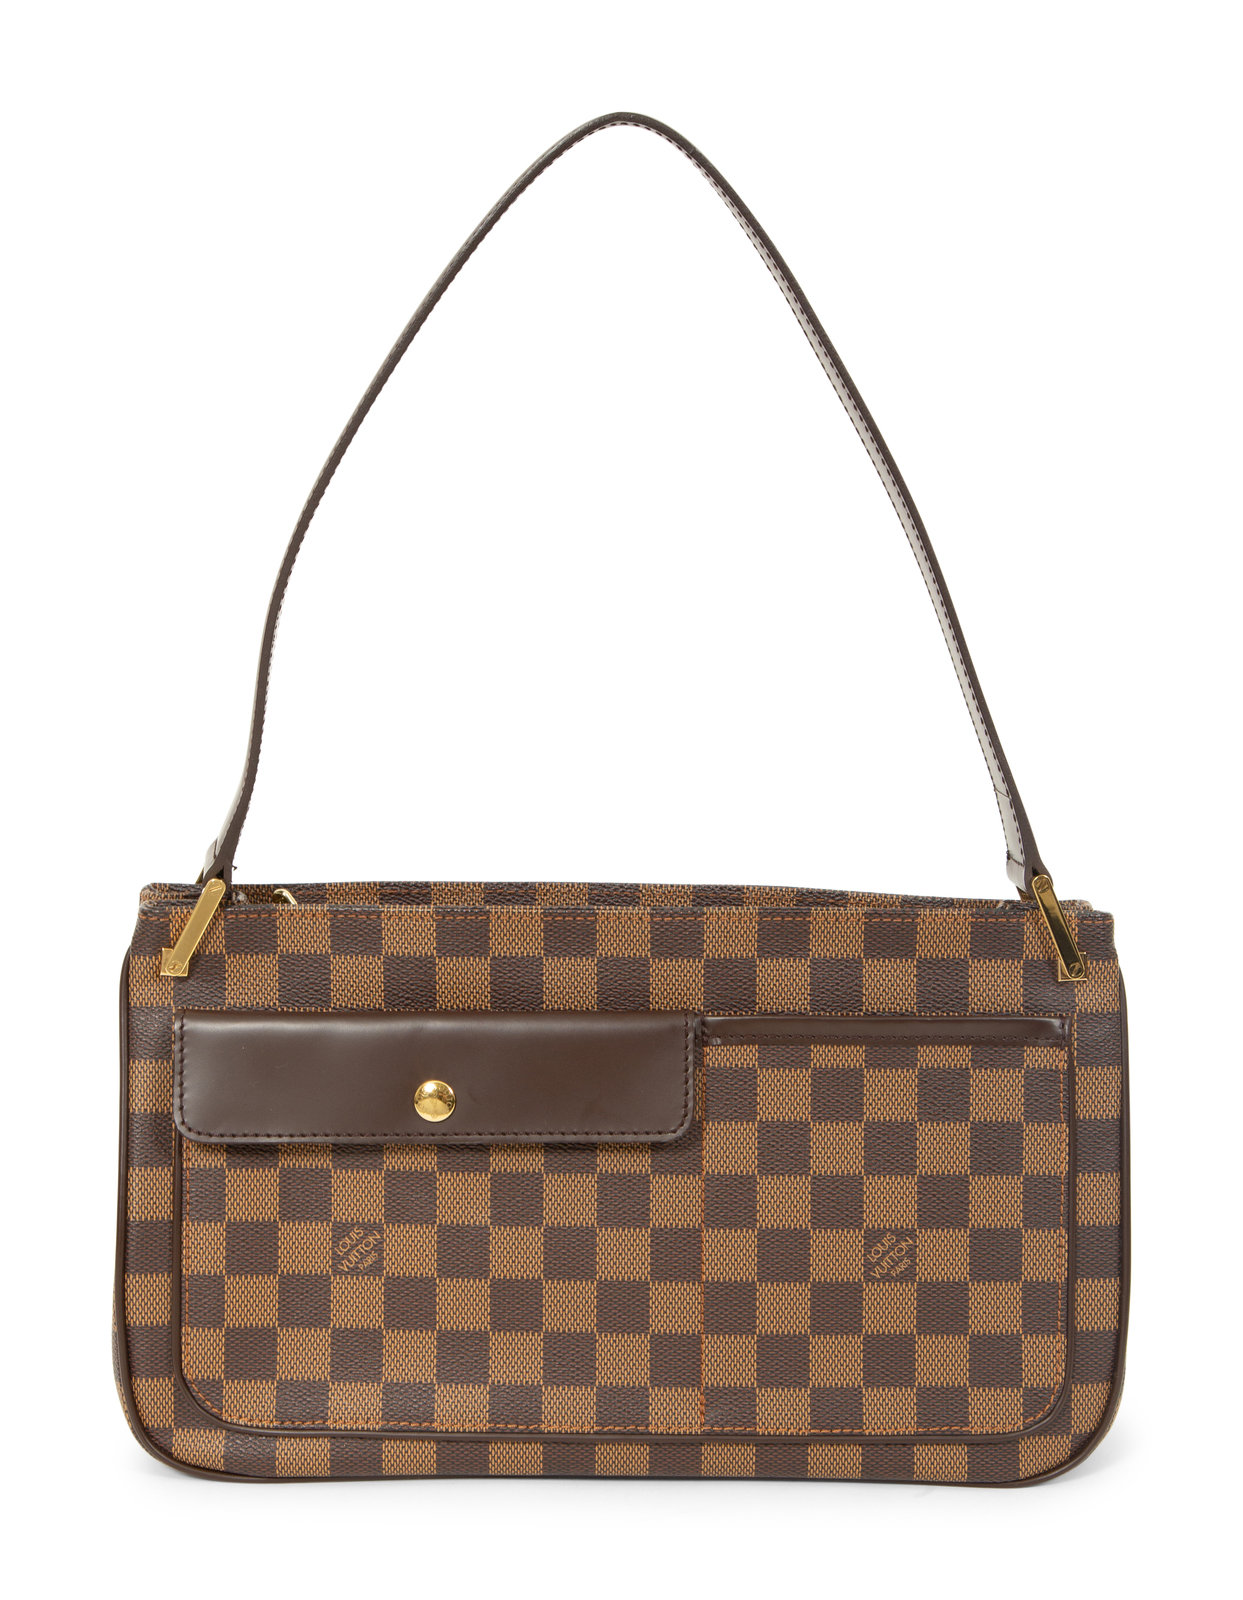 Sold at Auction: Louis Vuitton - Small bucket bag - 2004